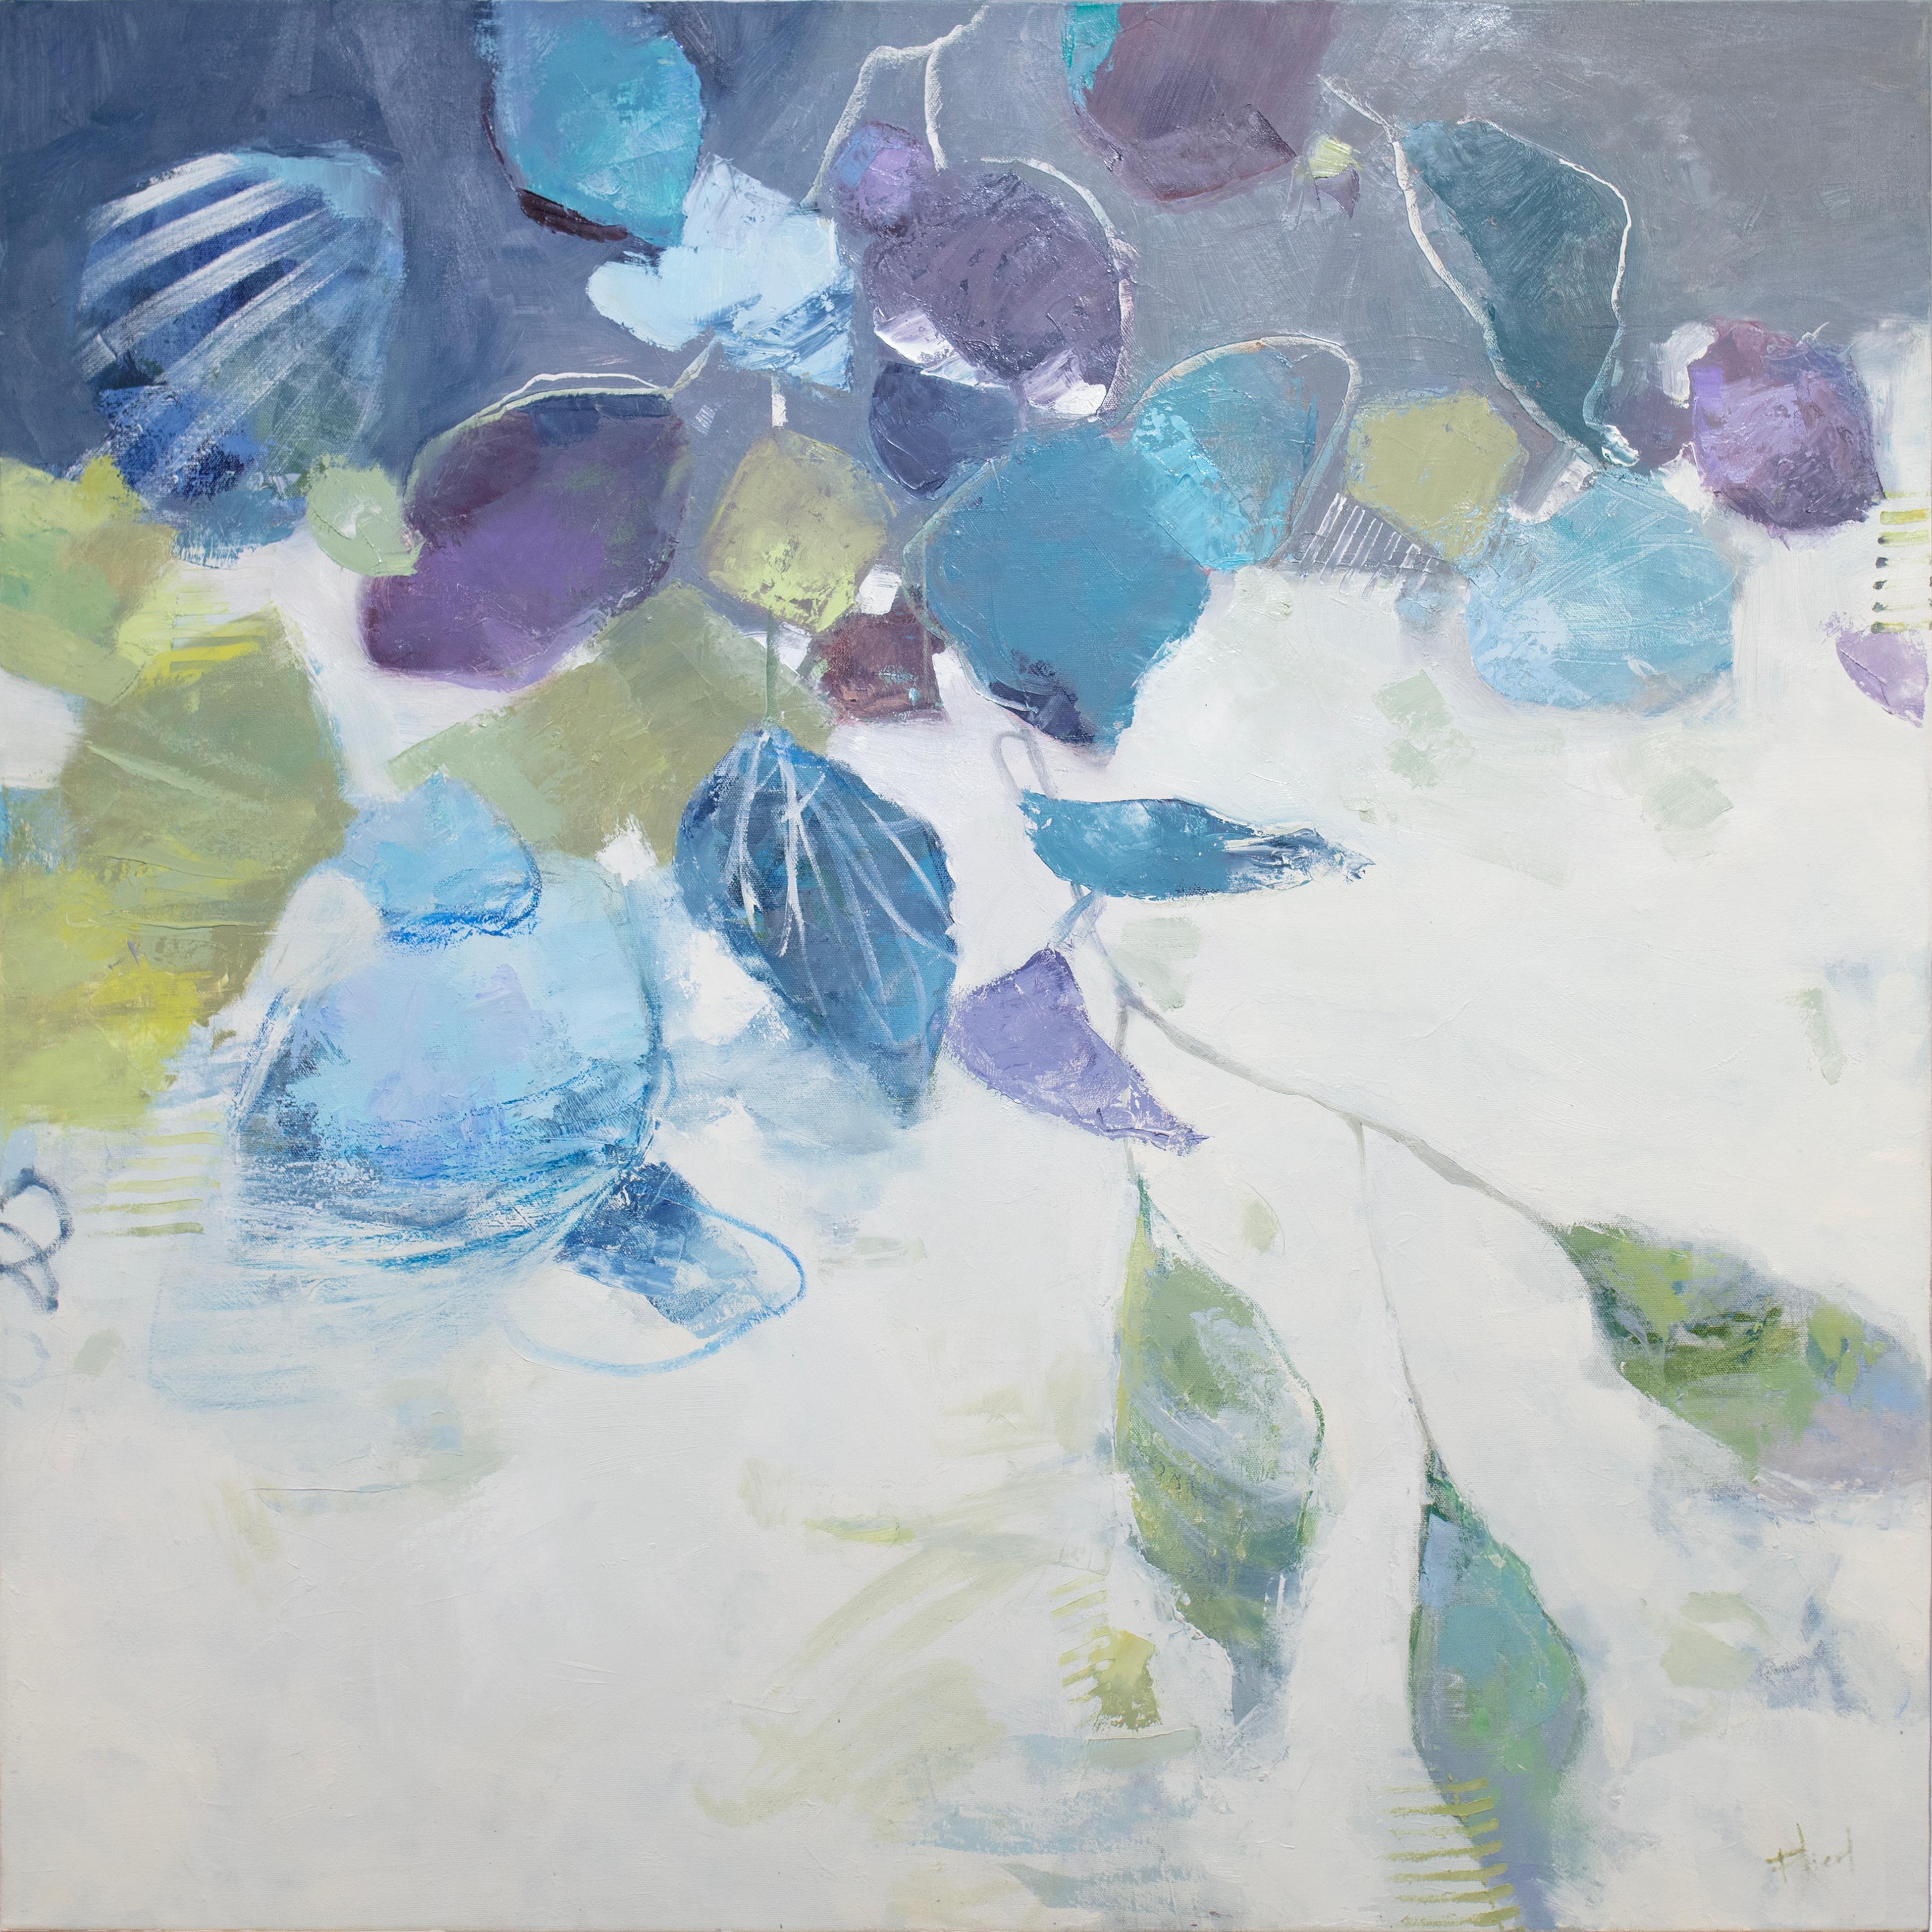 This abstract floral painting by Kay Flierl is made with oil paint on canvas and features a cool blue and white palette with earthy green and violet accents. Painted abstract botanical shapes fan from the top of the composition down toward the